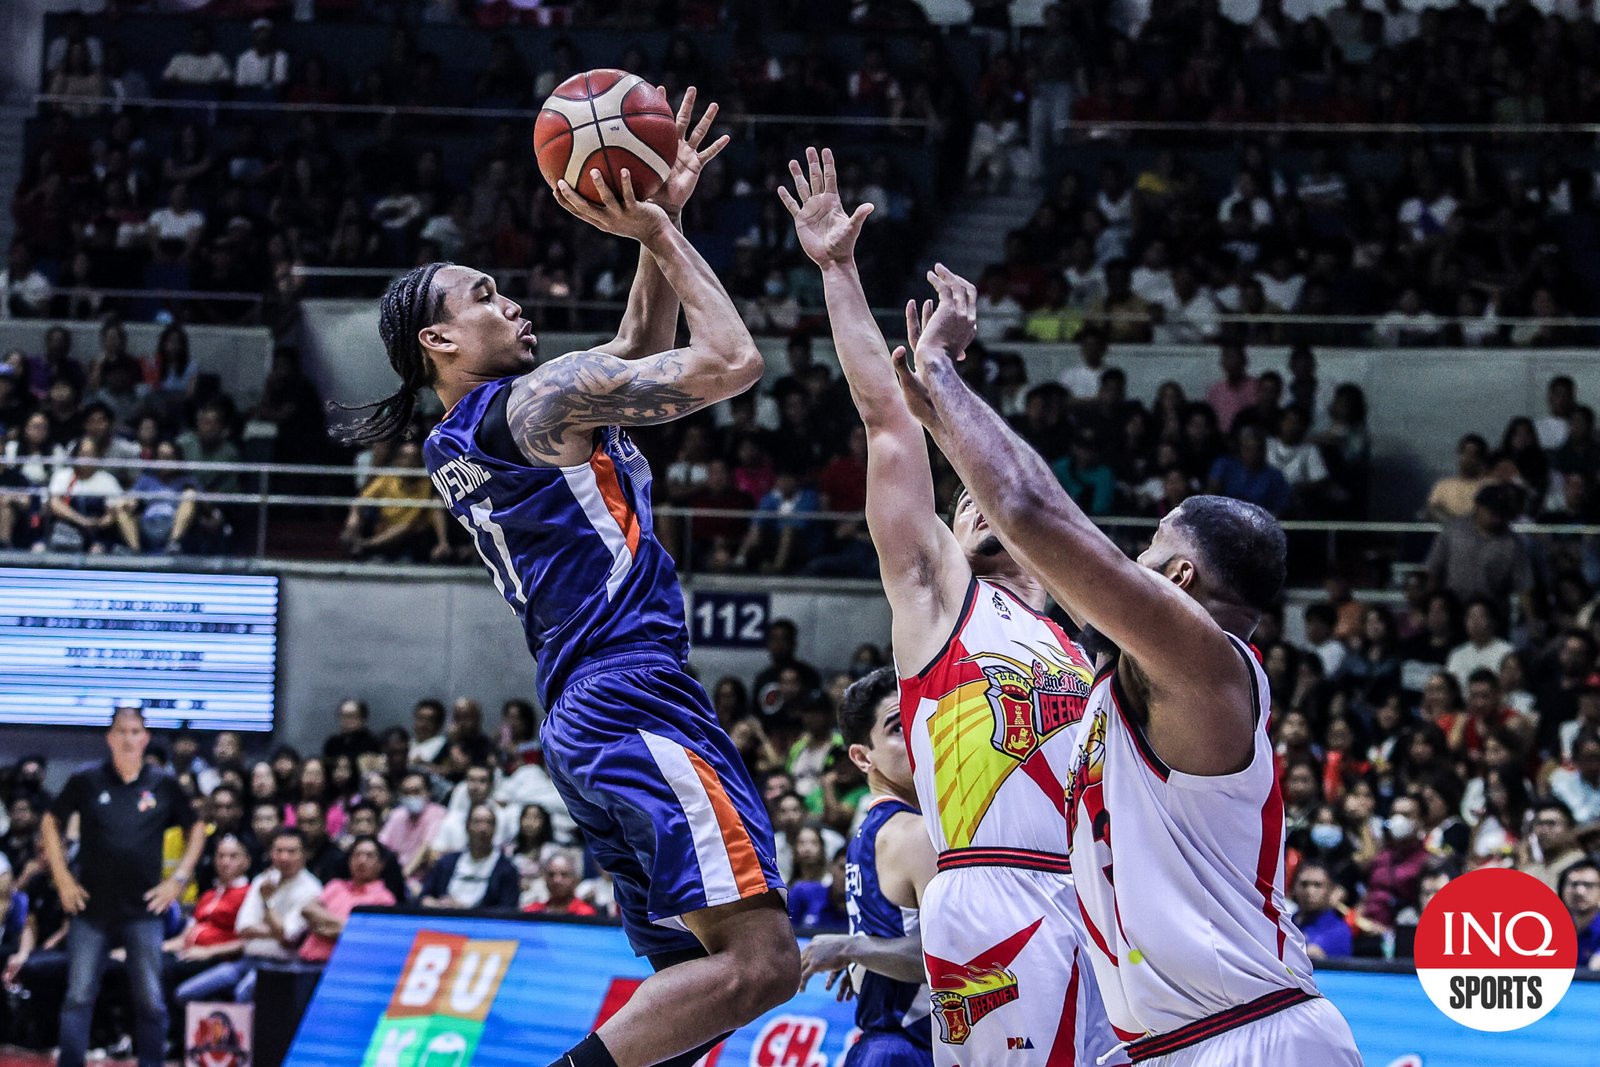 After soaring into PBA lore, Newsome hopes to make the same impact for Gilas Pilipinas